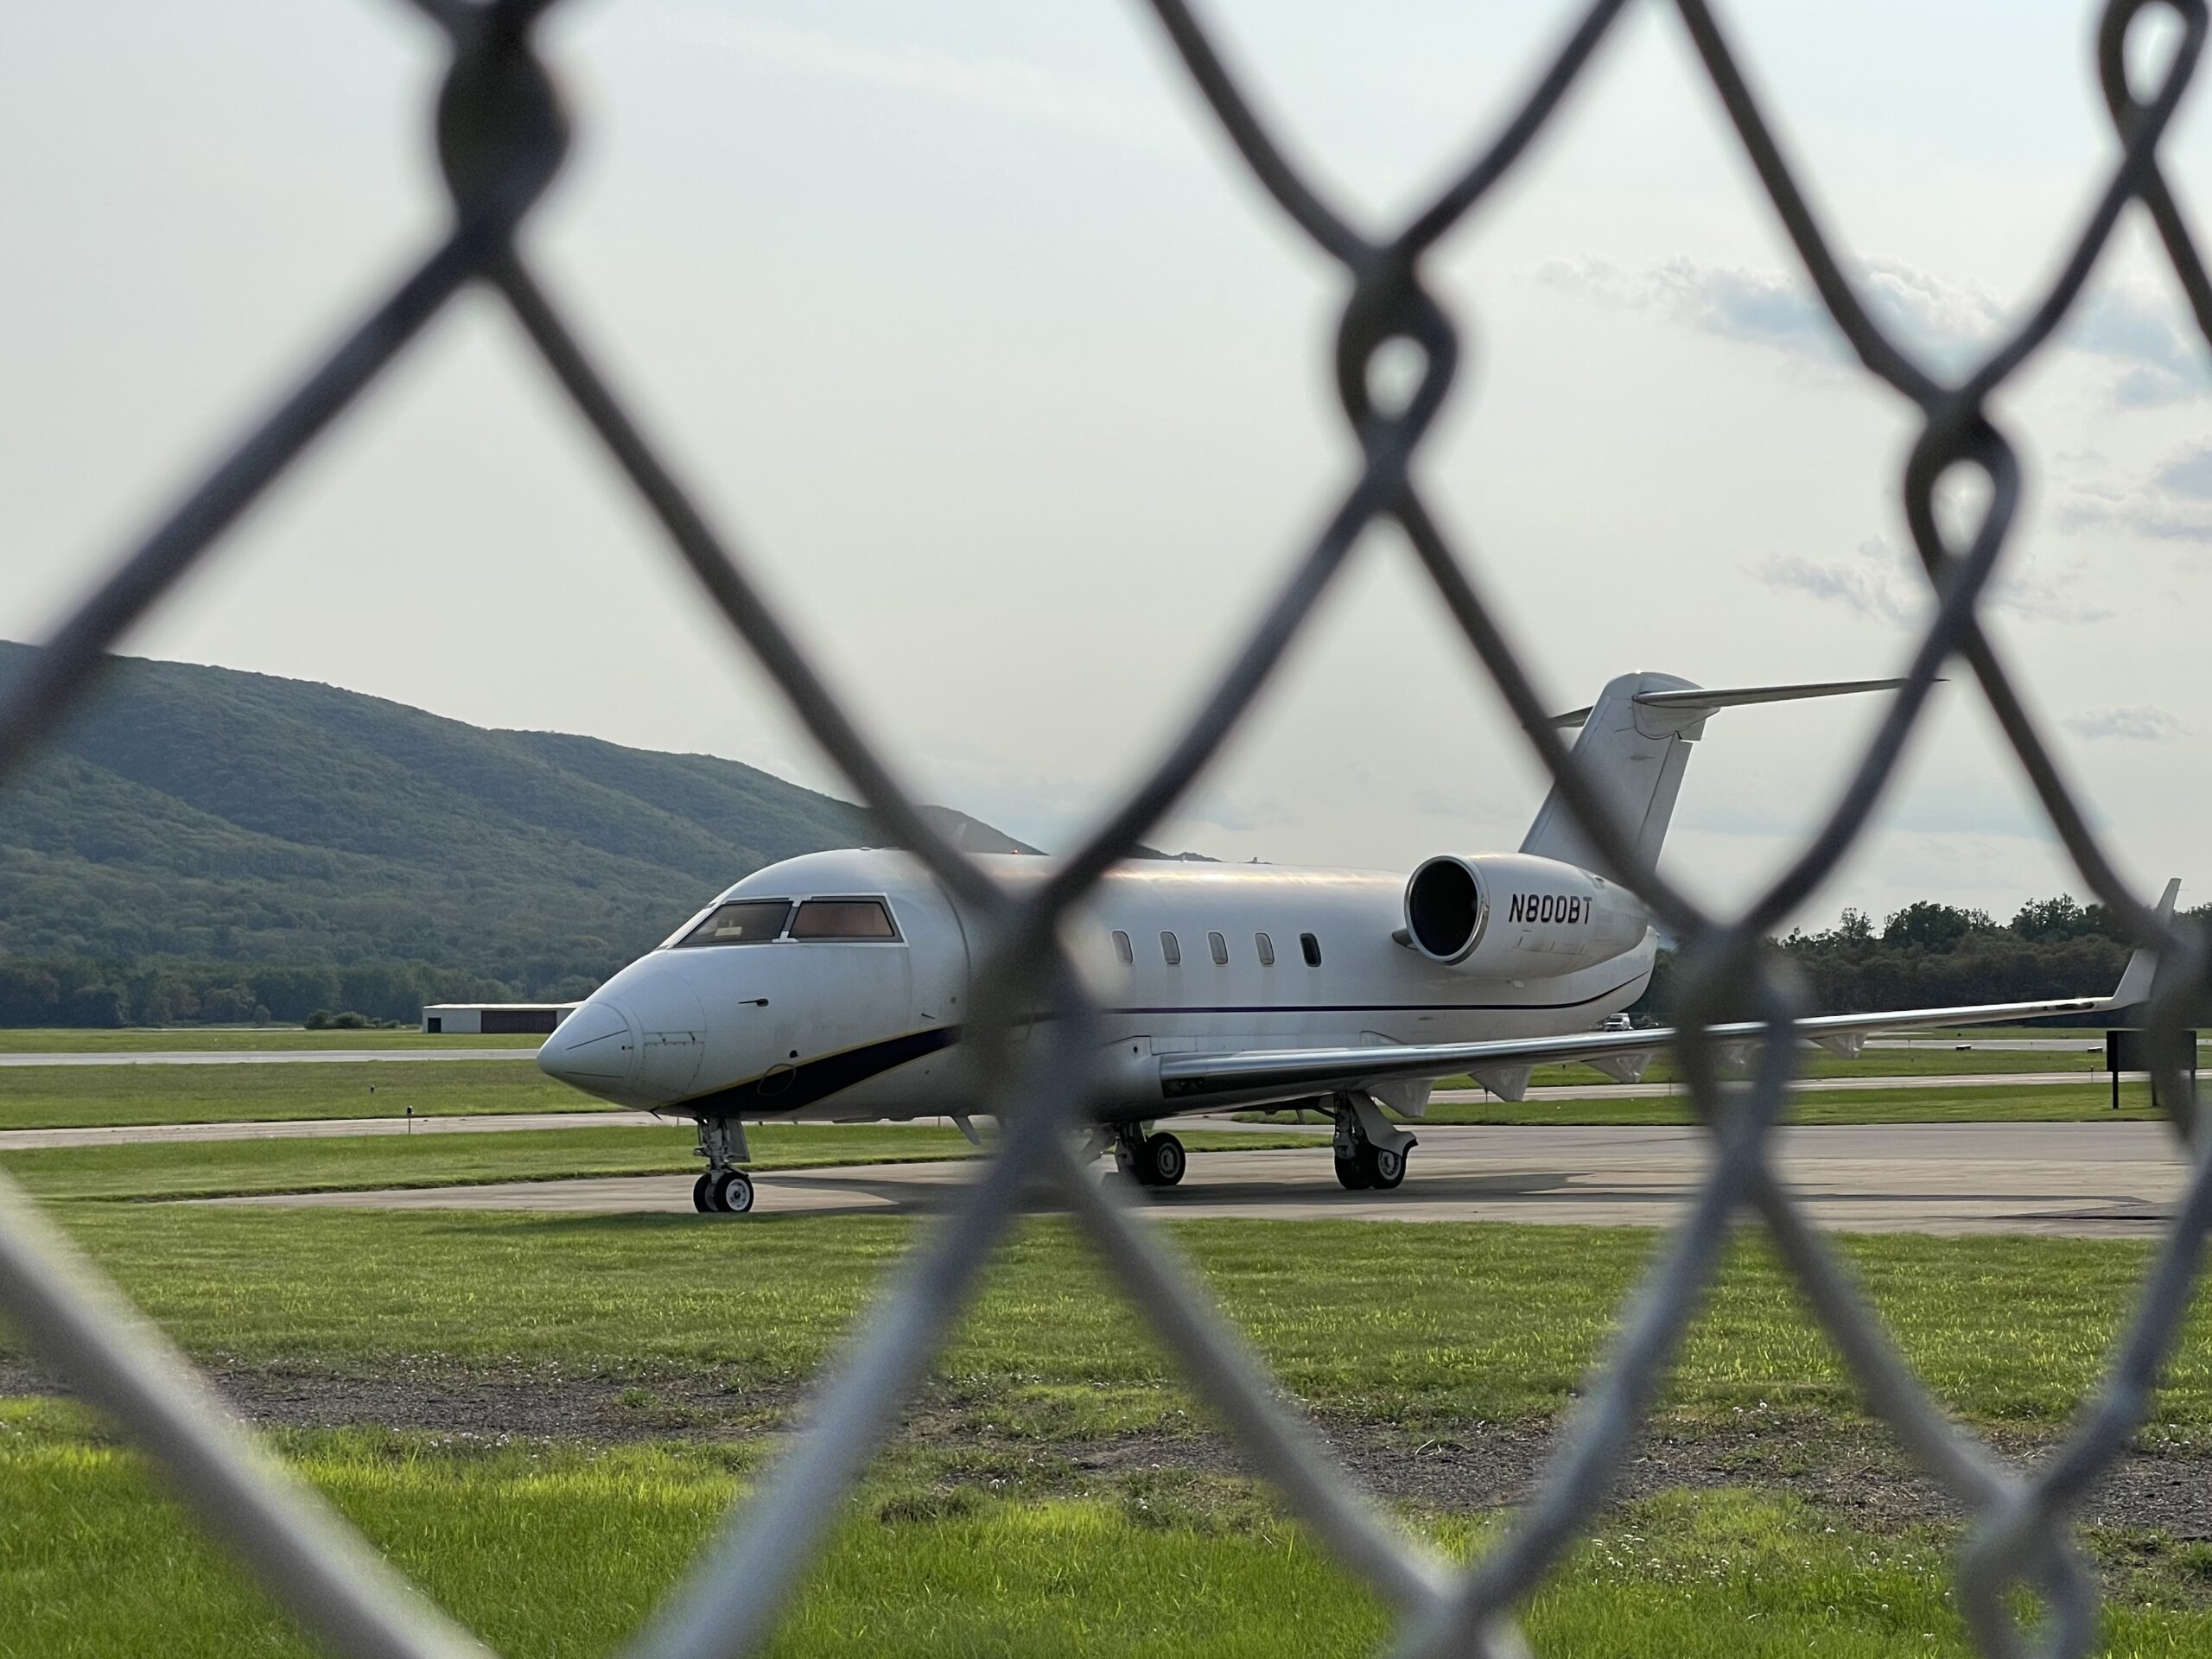 a plan on a runway, as seen from behind a fence